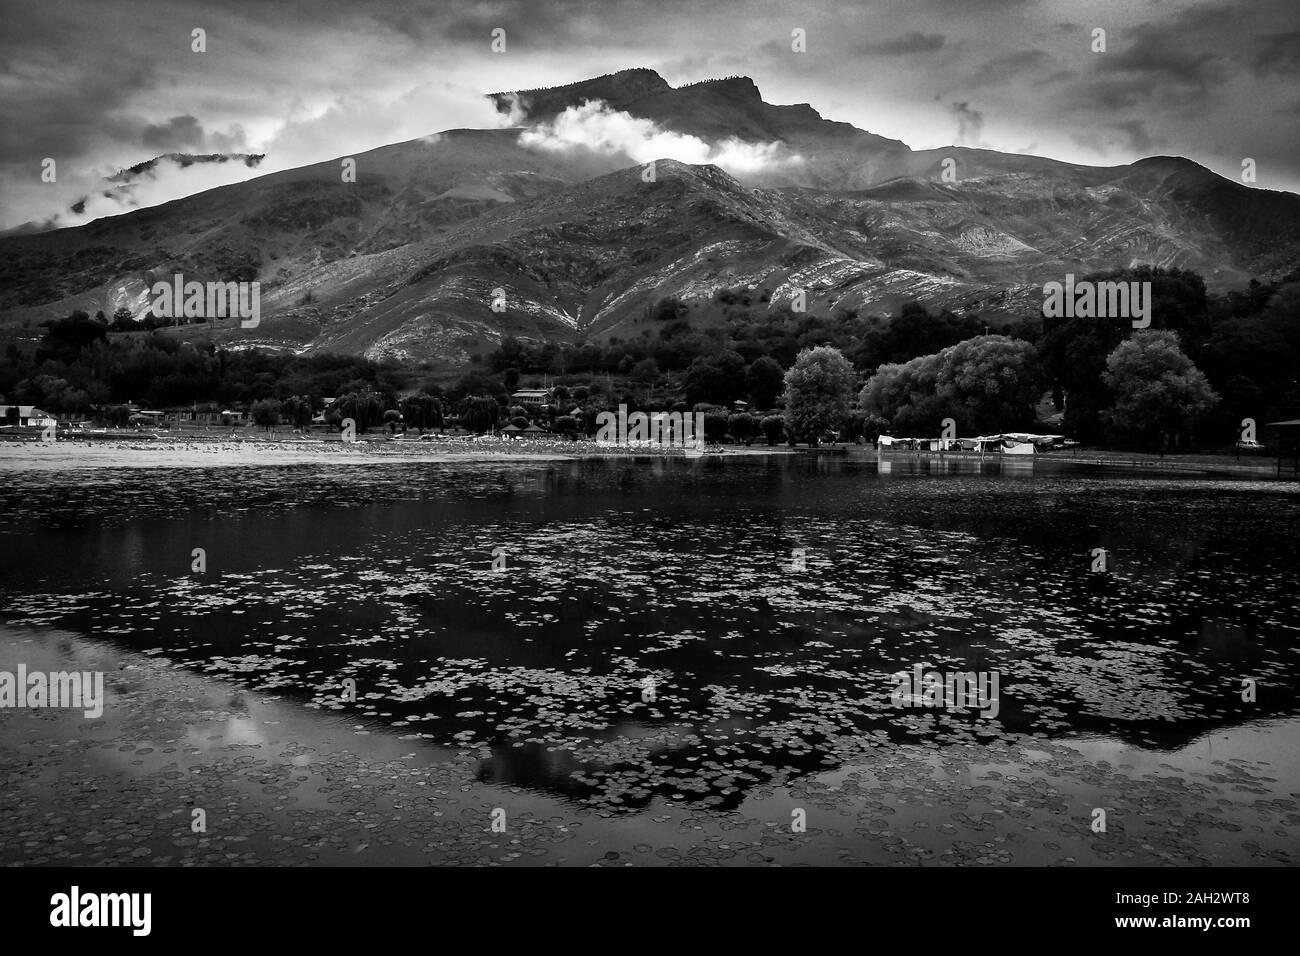 Dramatic black and white view of Manasbal lake with a hill in the backdrop Stock Photo